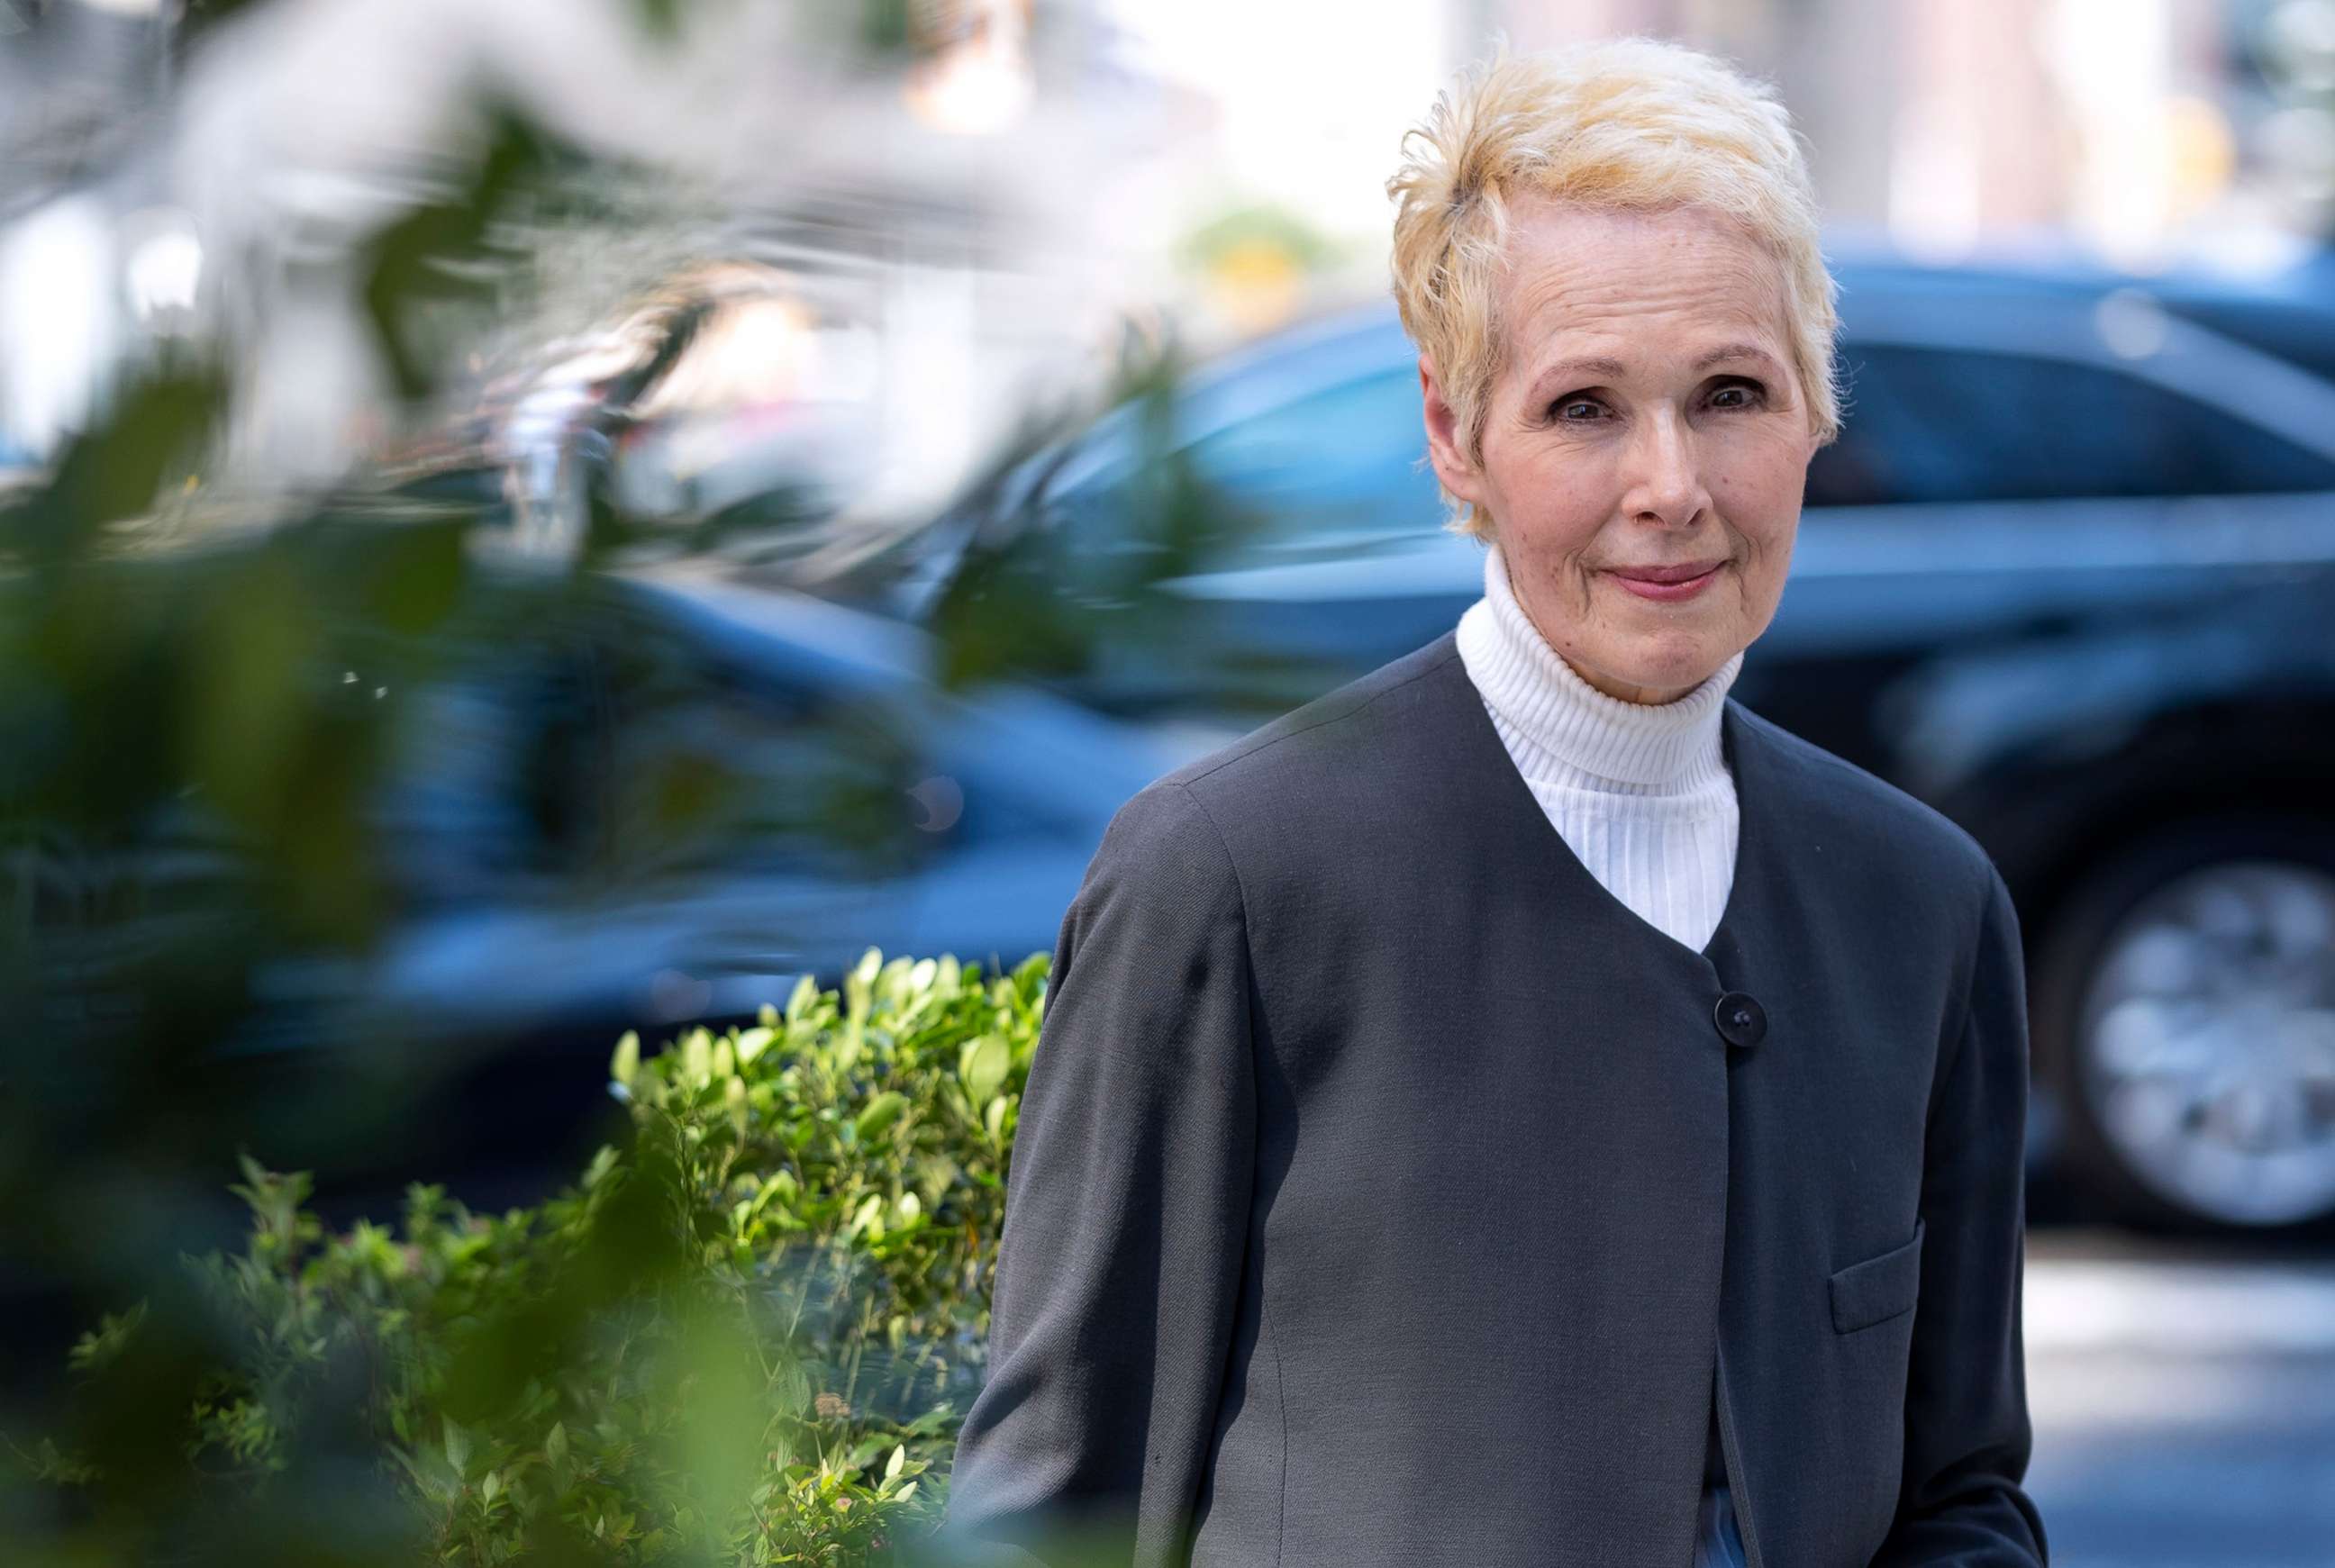 PHOTO: E. Jean Carroll is photographed on June 23, 2019, in New York.